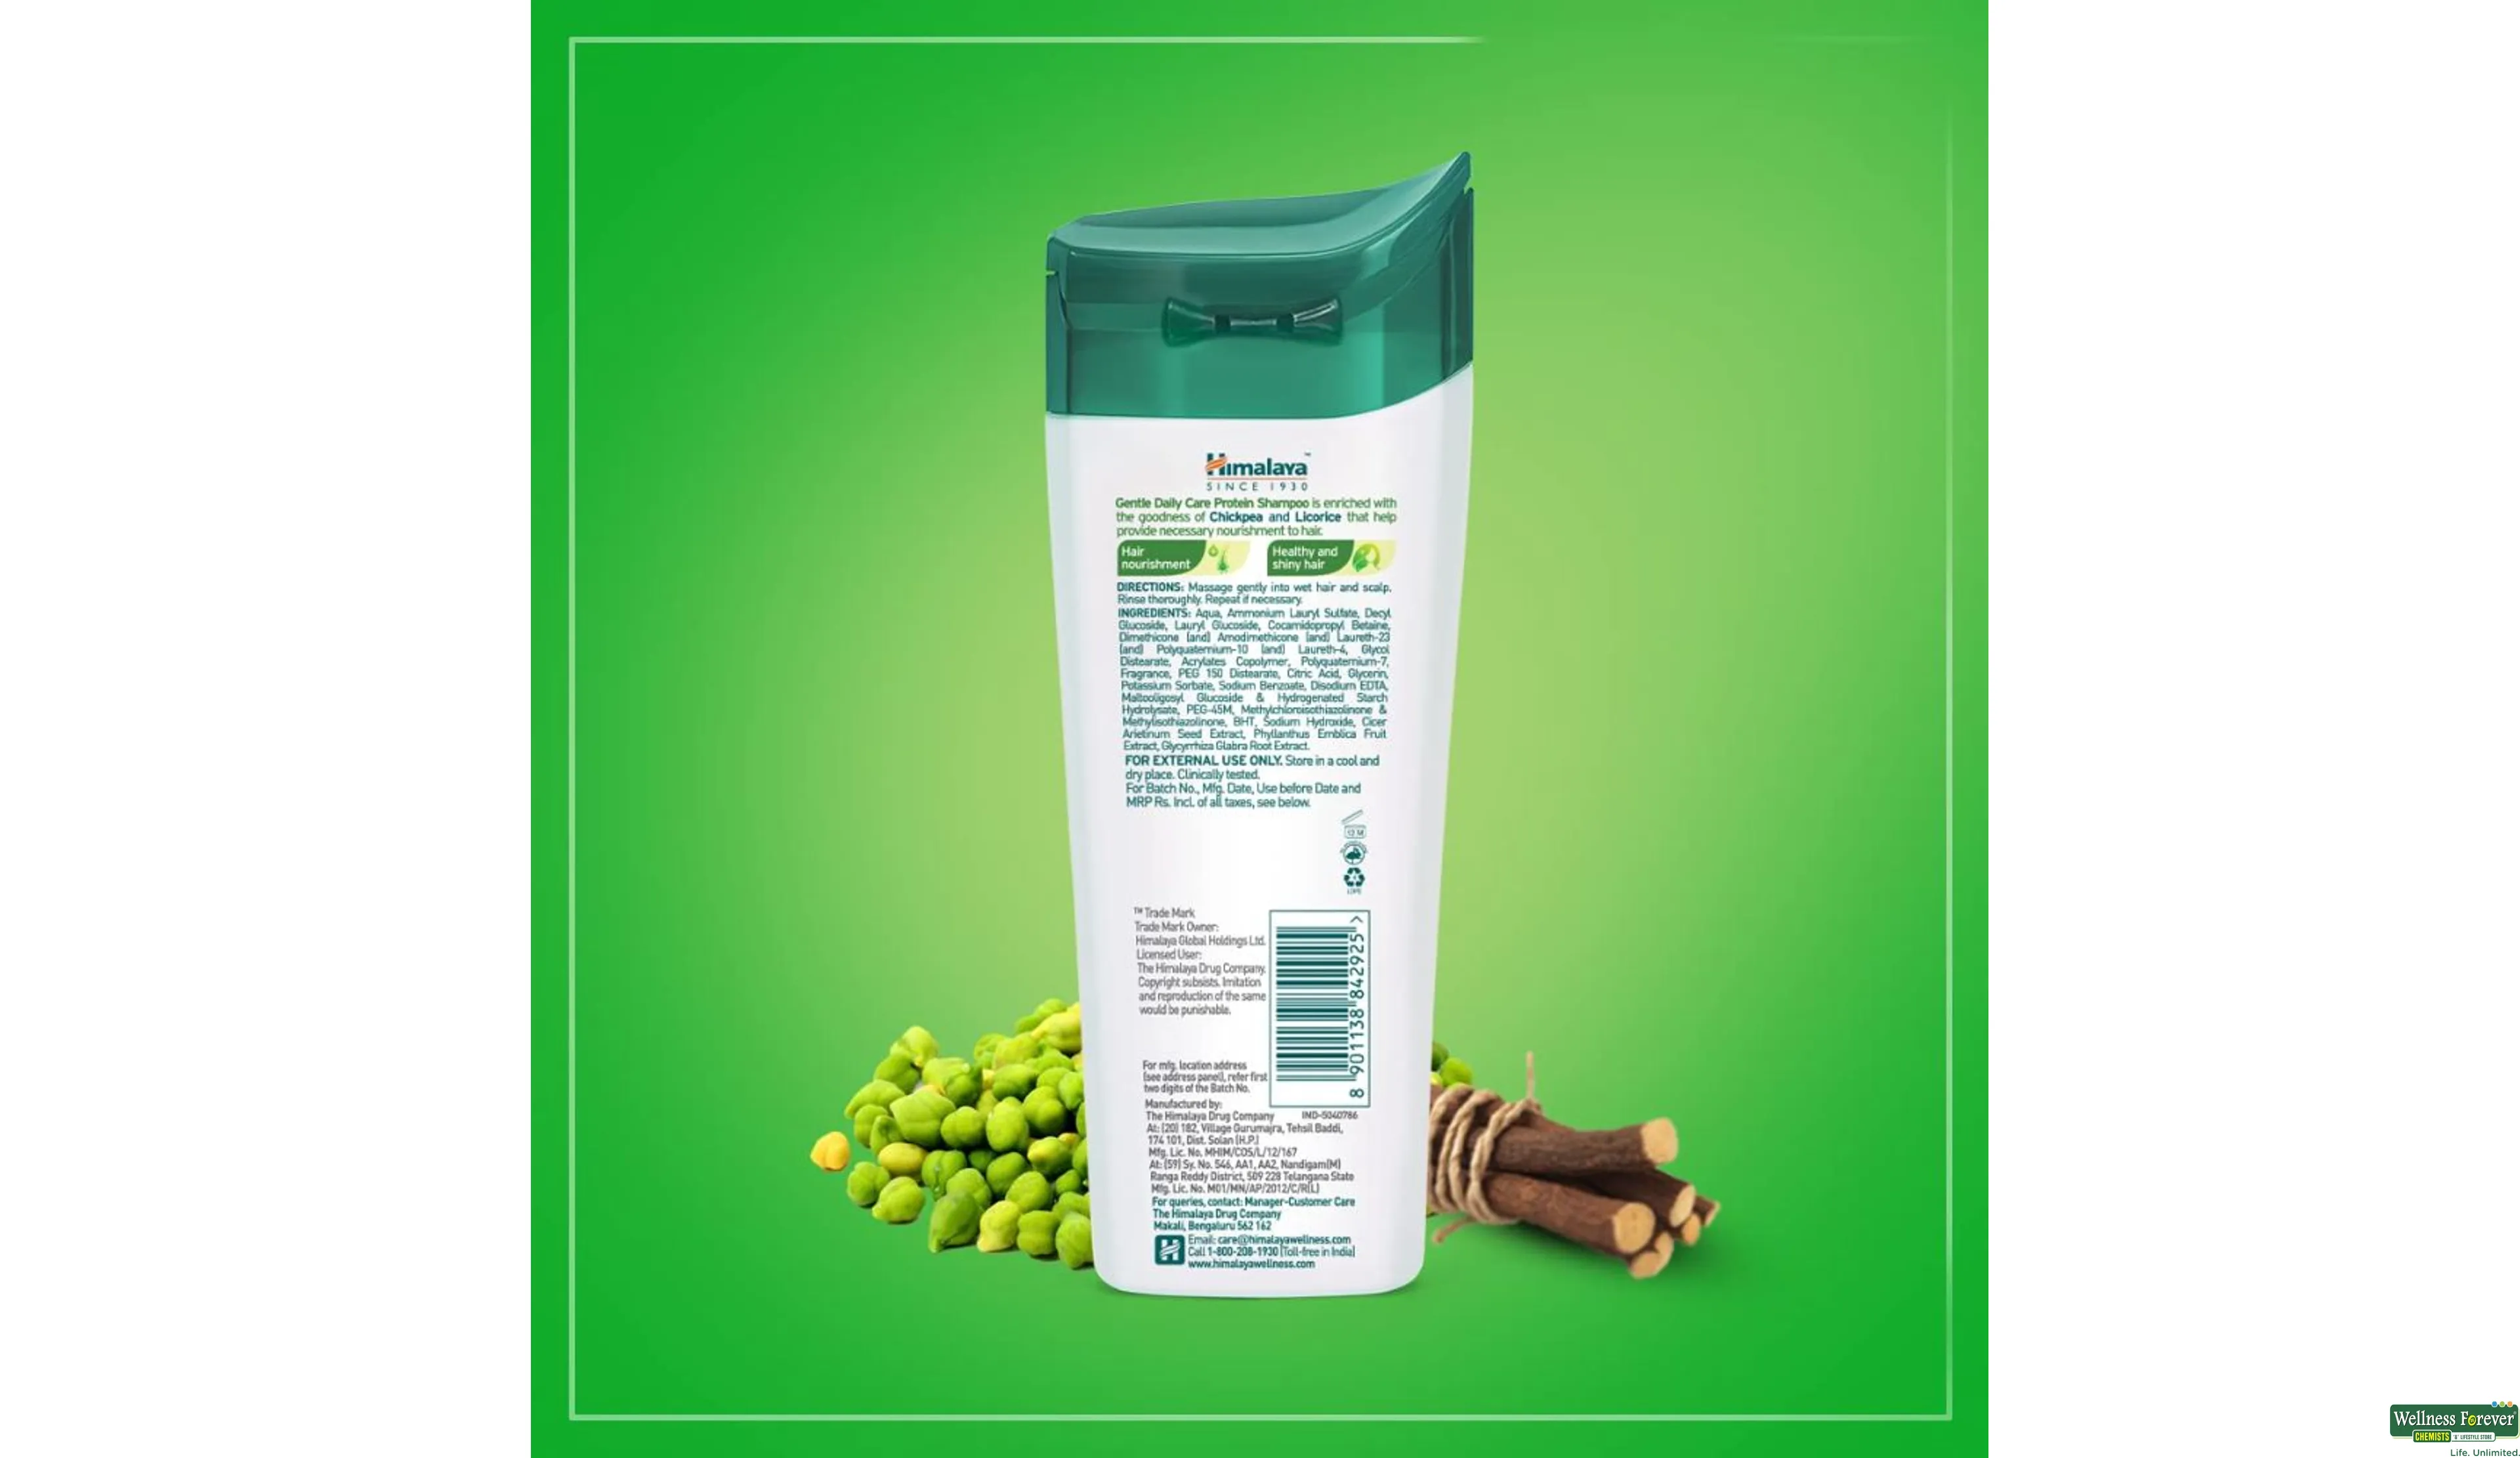 GENTLE DAILY CARE NATURAL PROTEIN SHAMPOO 340ML- 6, 340ML, 